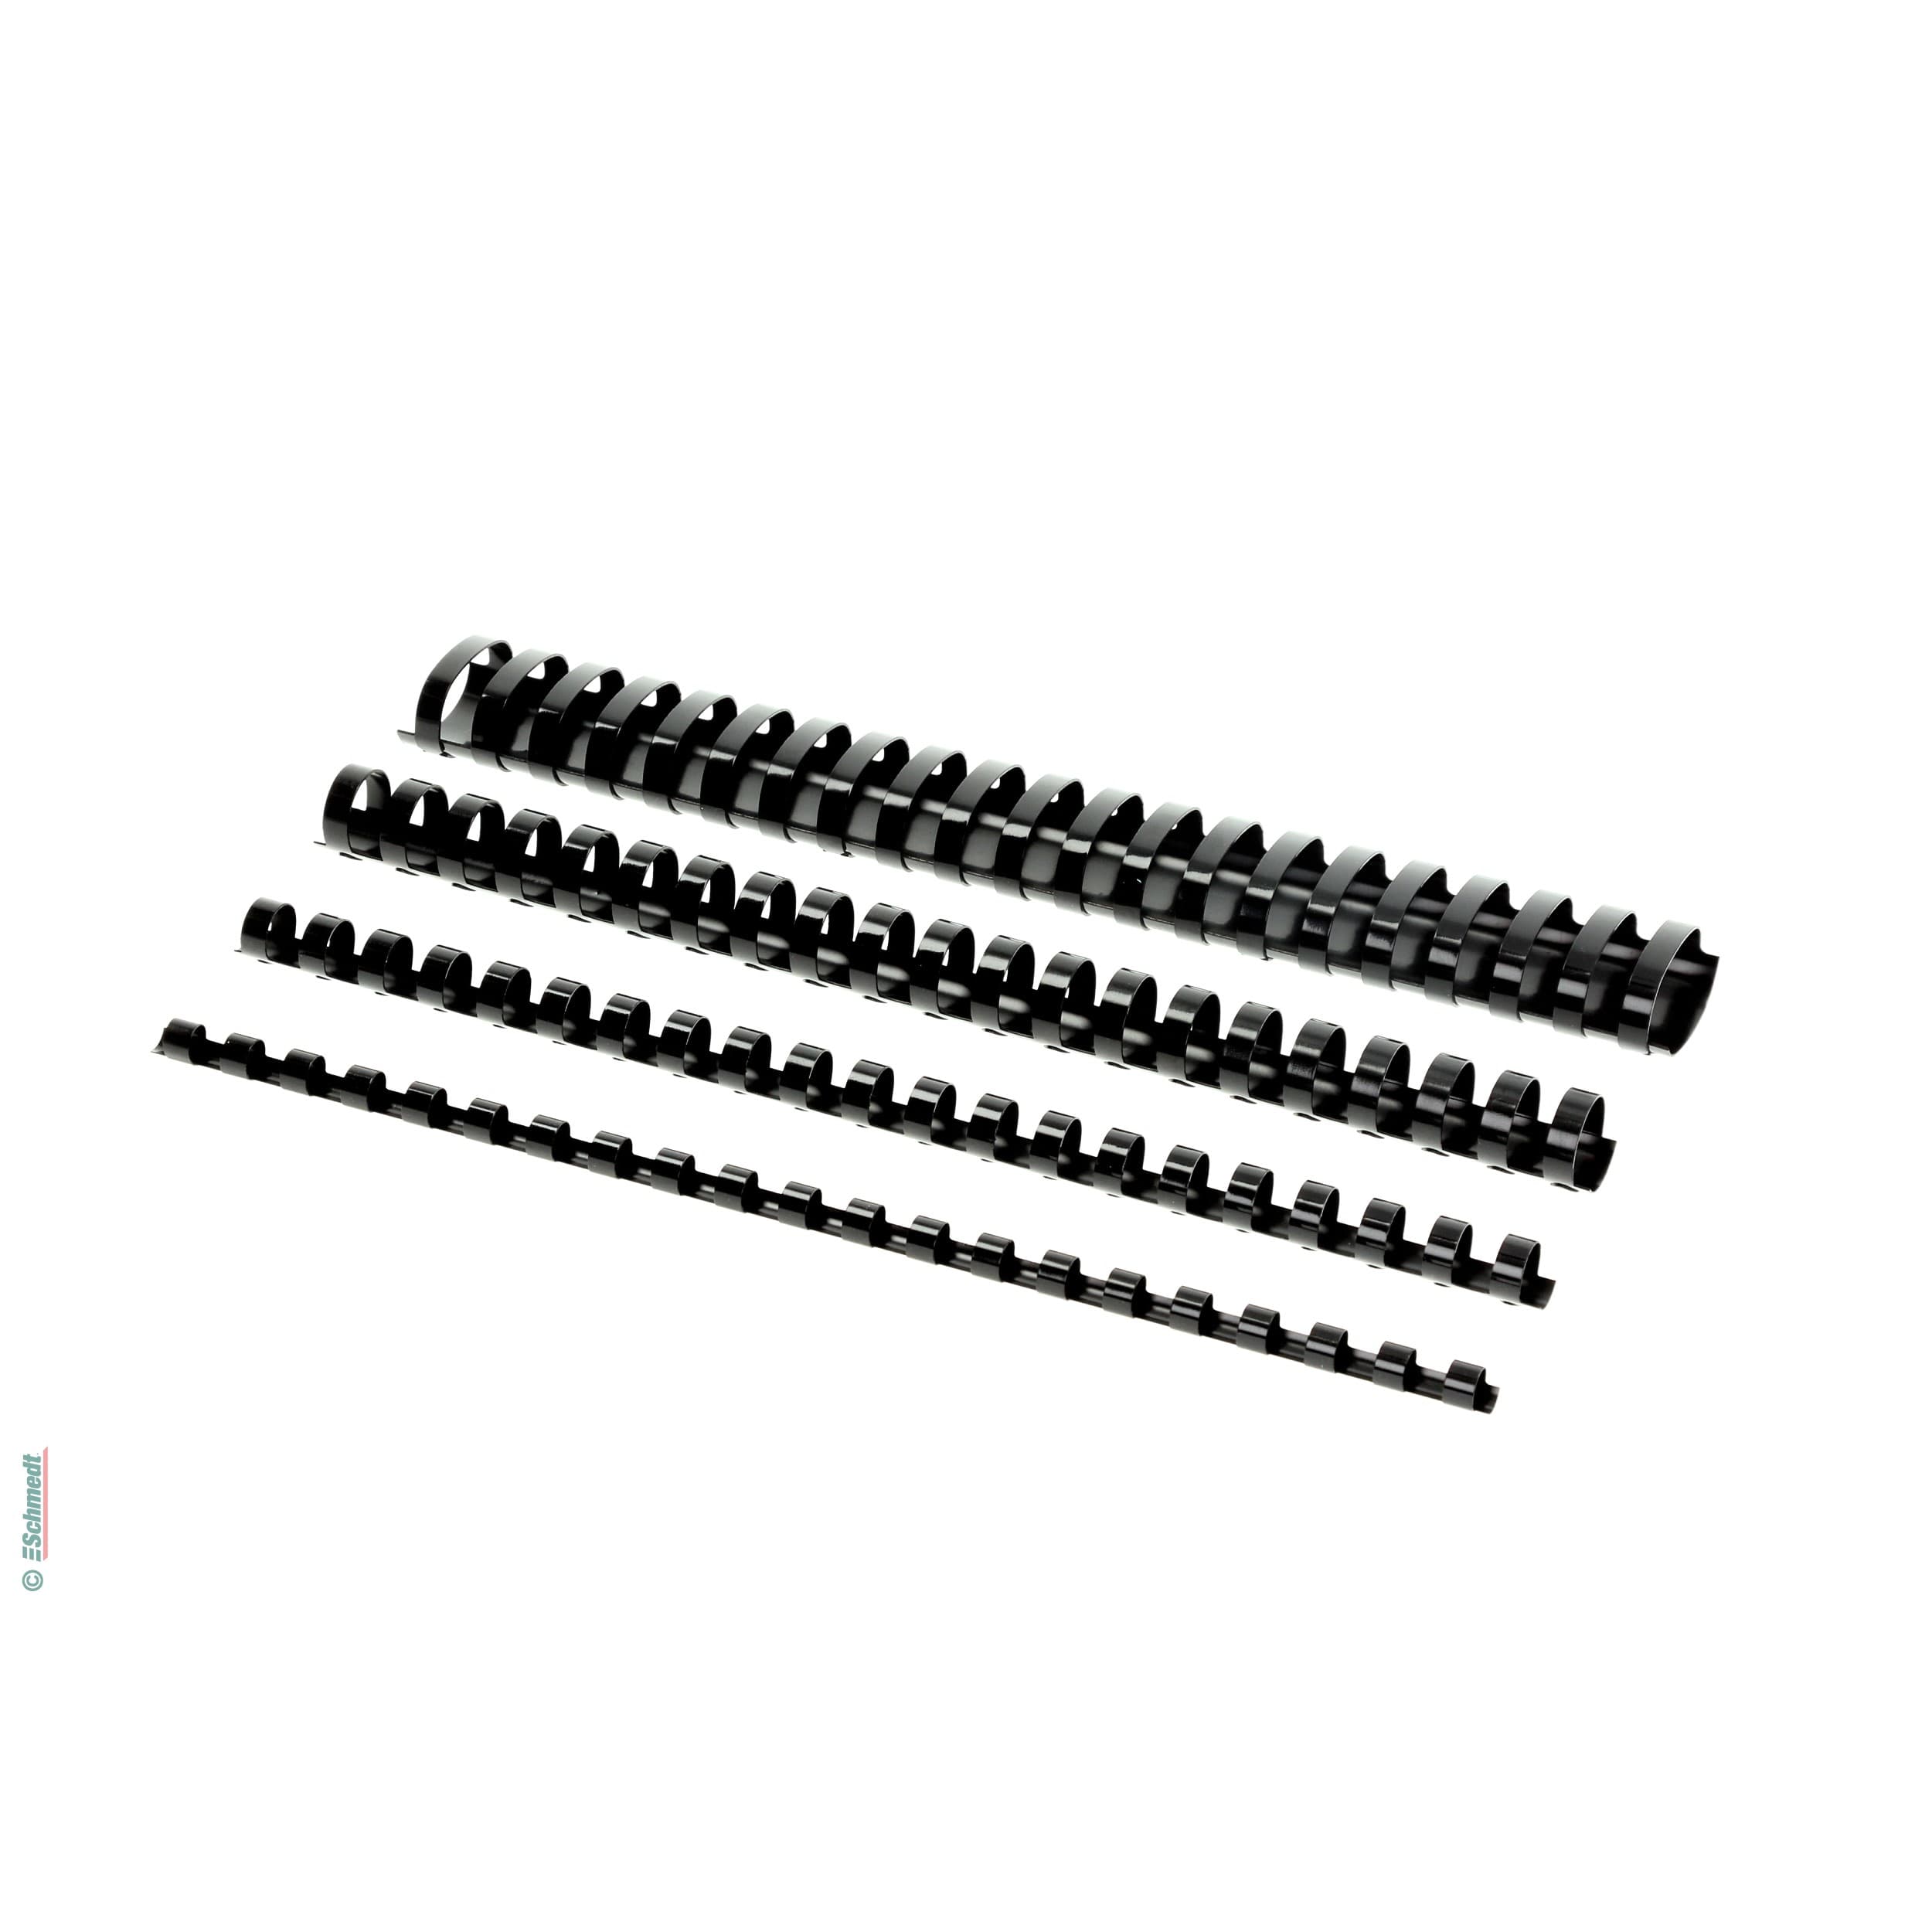 Plastic binding combs - round - Diameter (in mm) 19 - Colour black - to be processed in plastic-comb binding machines... - image-1